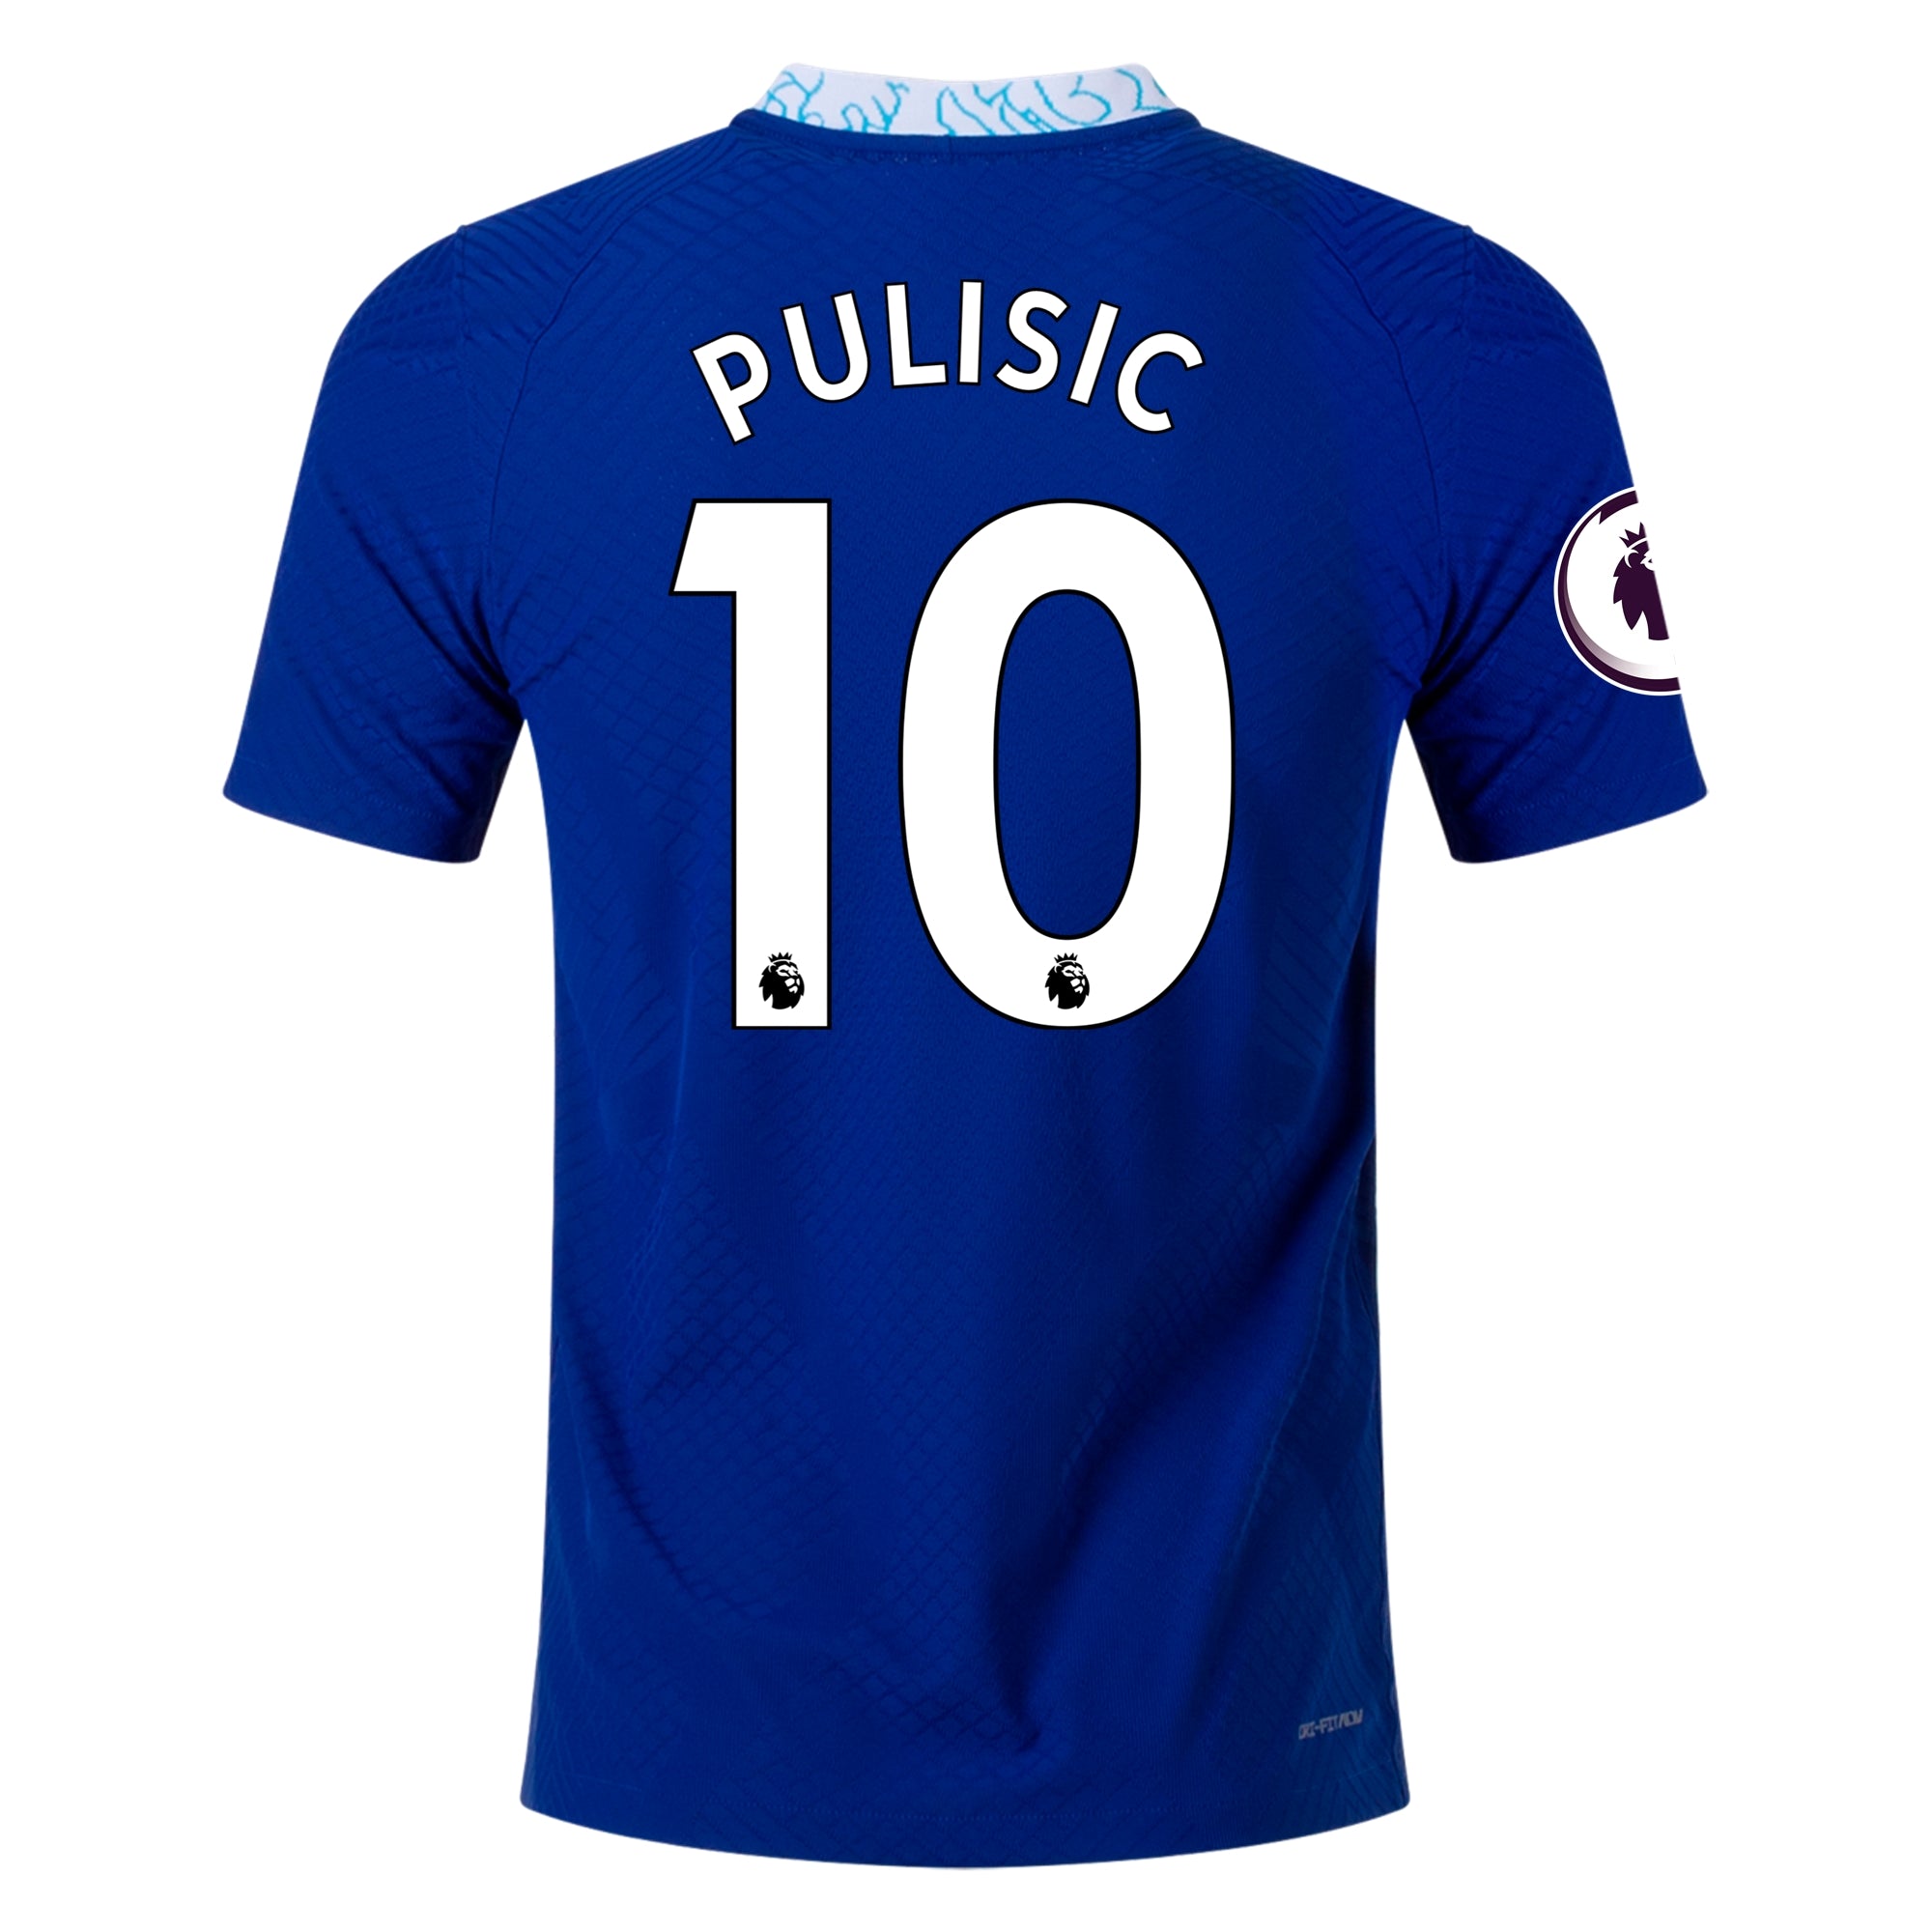 Men's Authentic Nike Pulisic Chelsea Home Jersey 22/23 DJ7641-496 ...